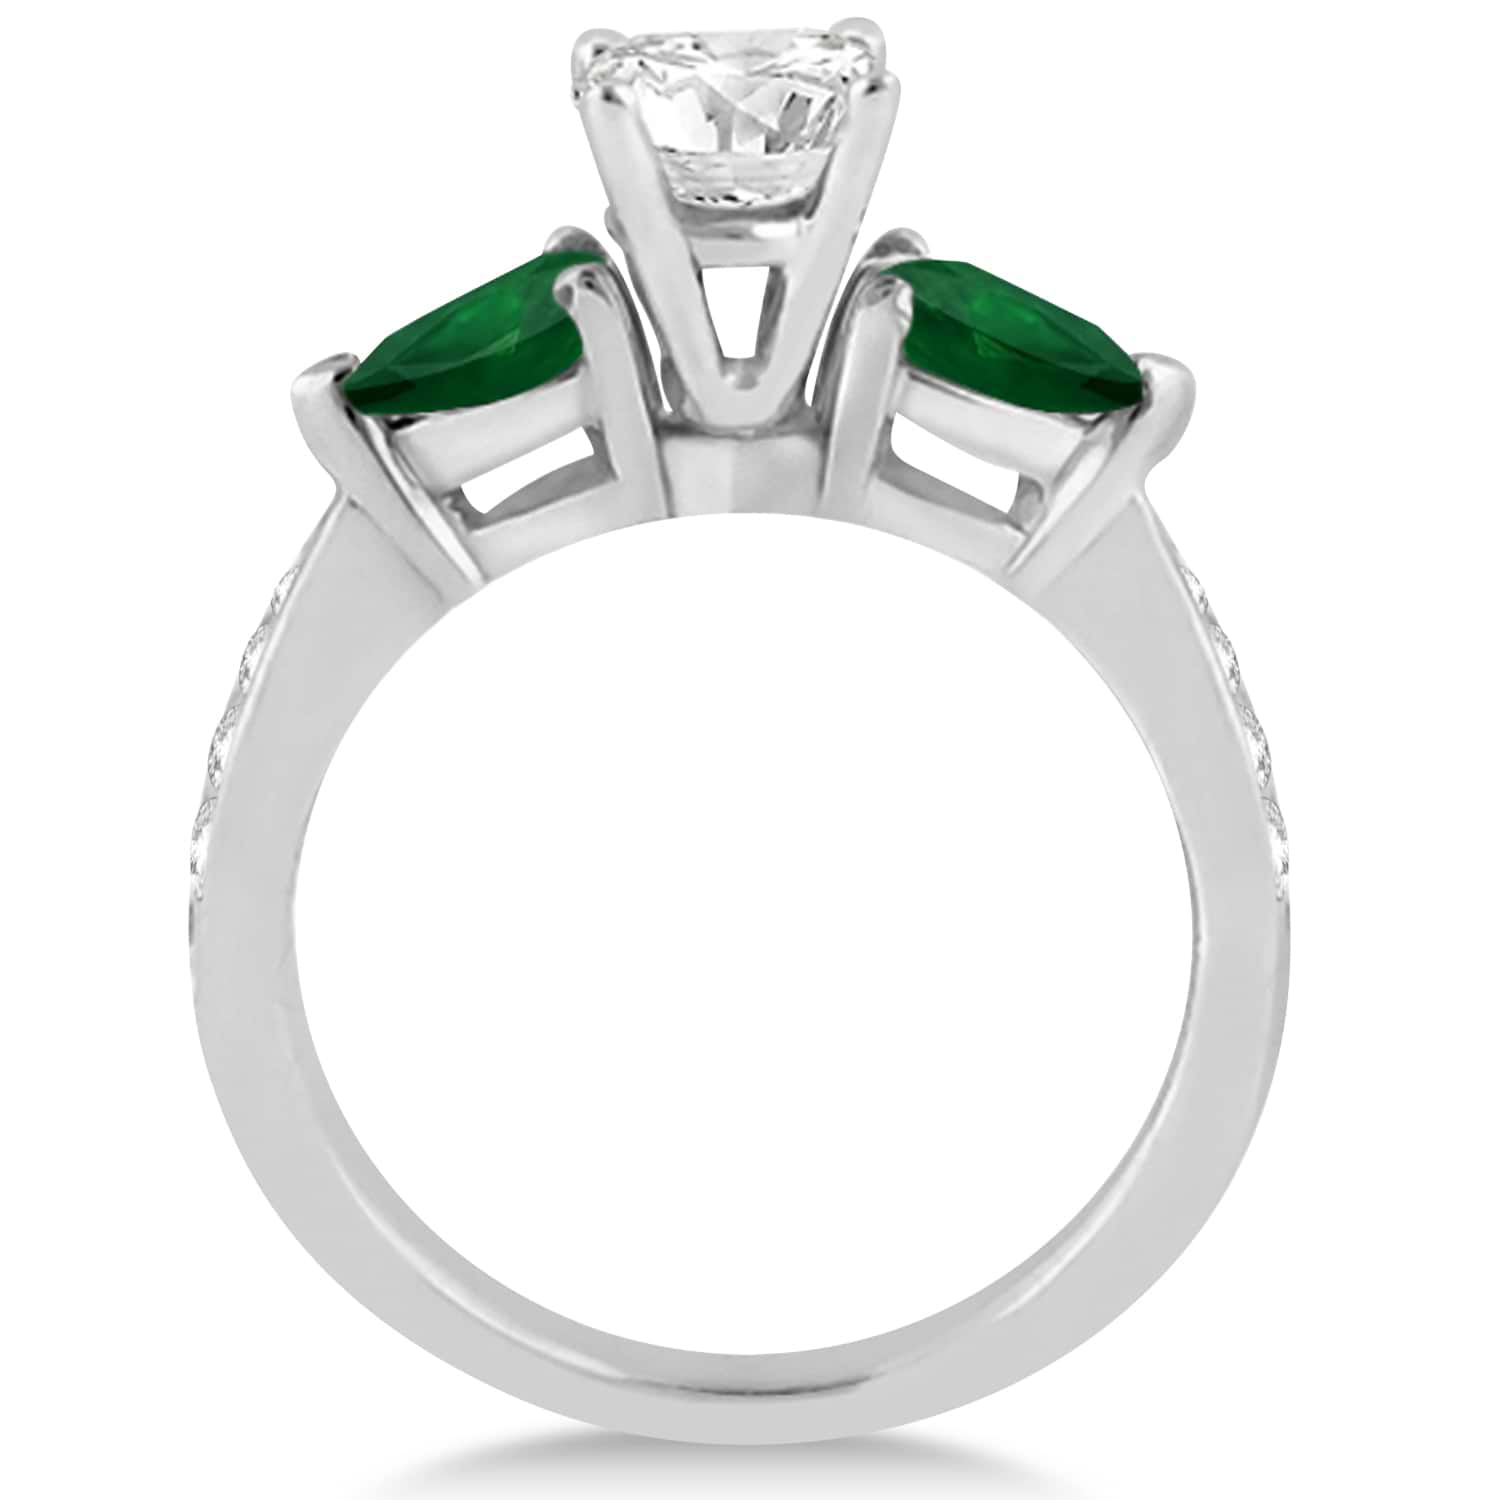 Round Diamond & Pear Green Emerald Engagement Ring 14k White Gold (1.29ct)